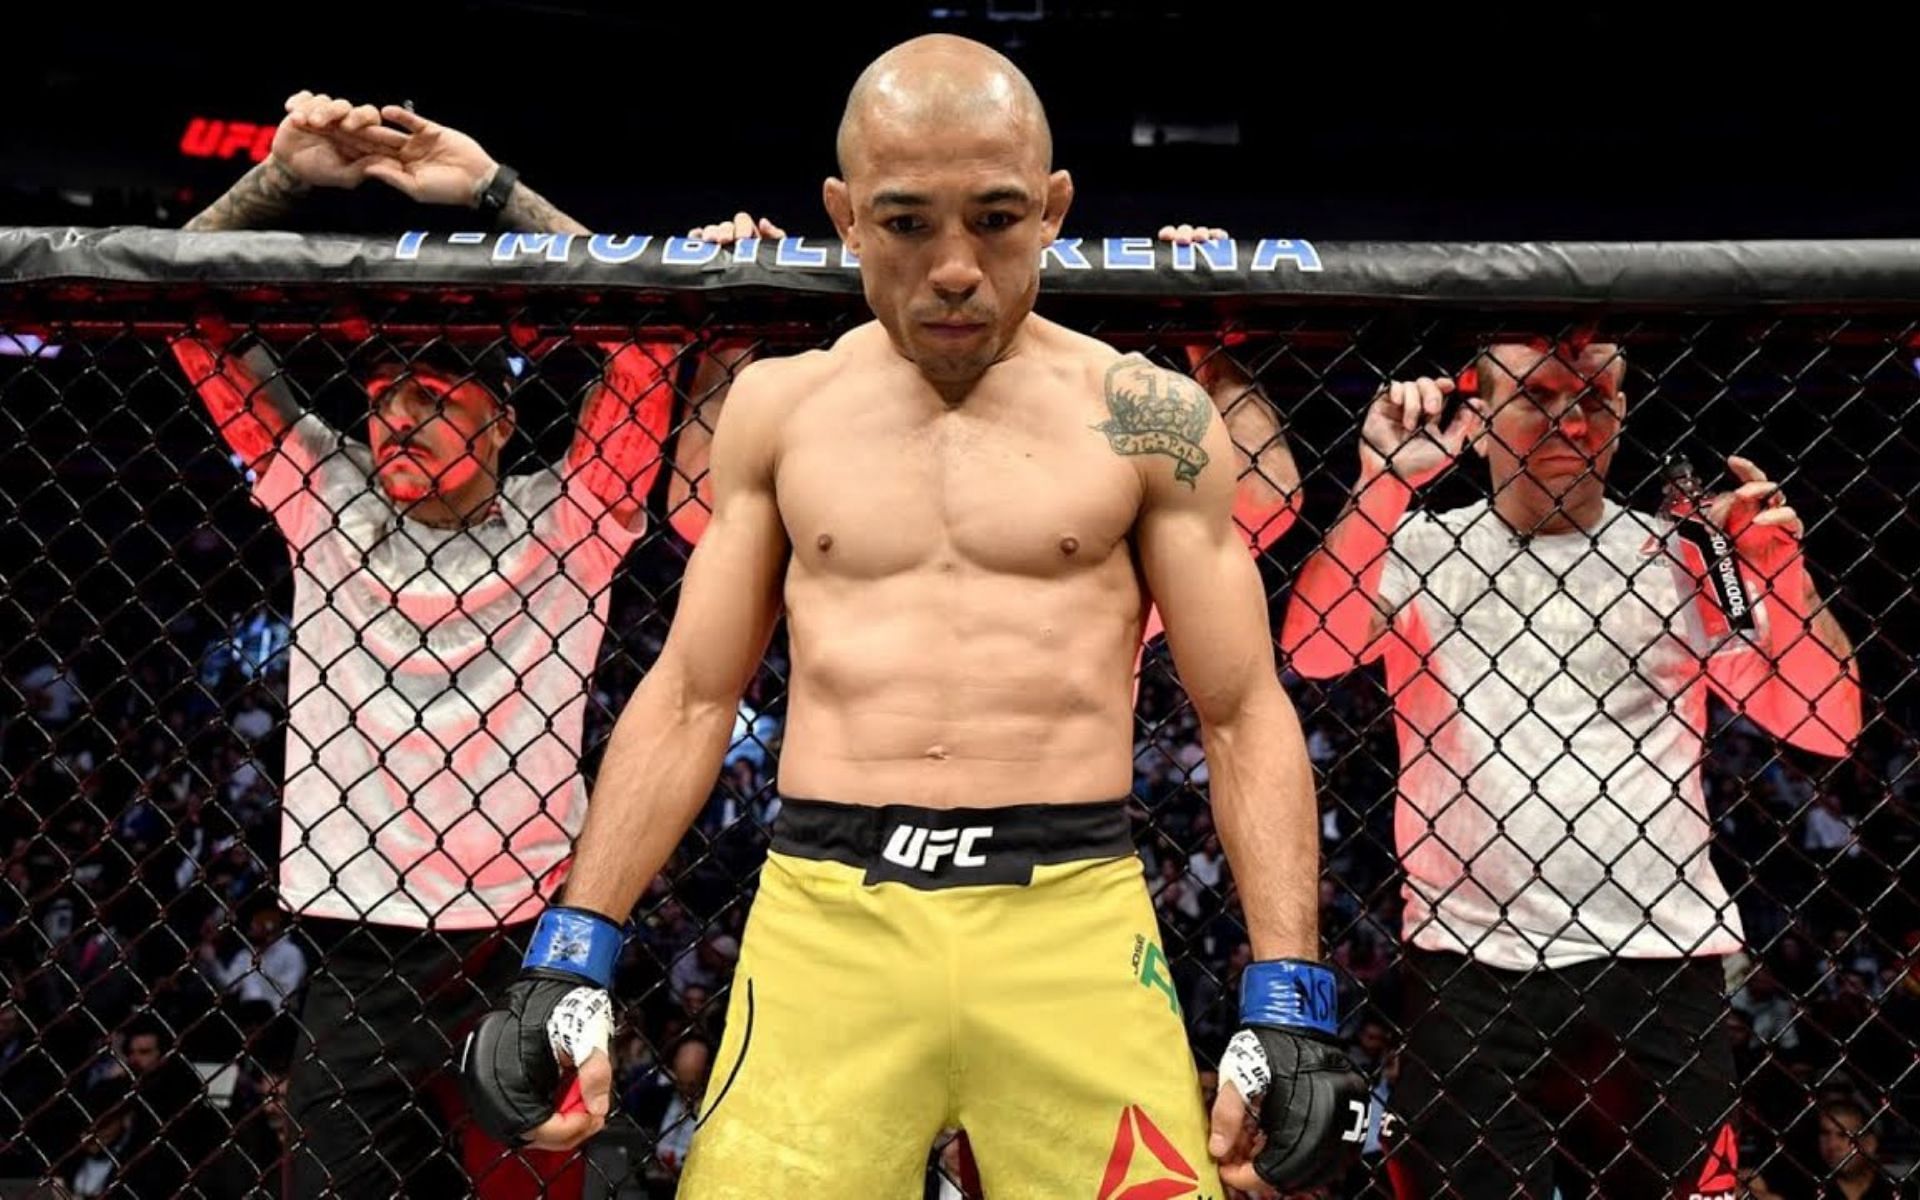 Legendary former UFC featherweight champion Jose Aldo has finally hung up his gloves